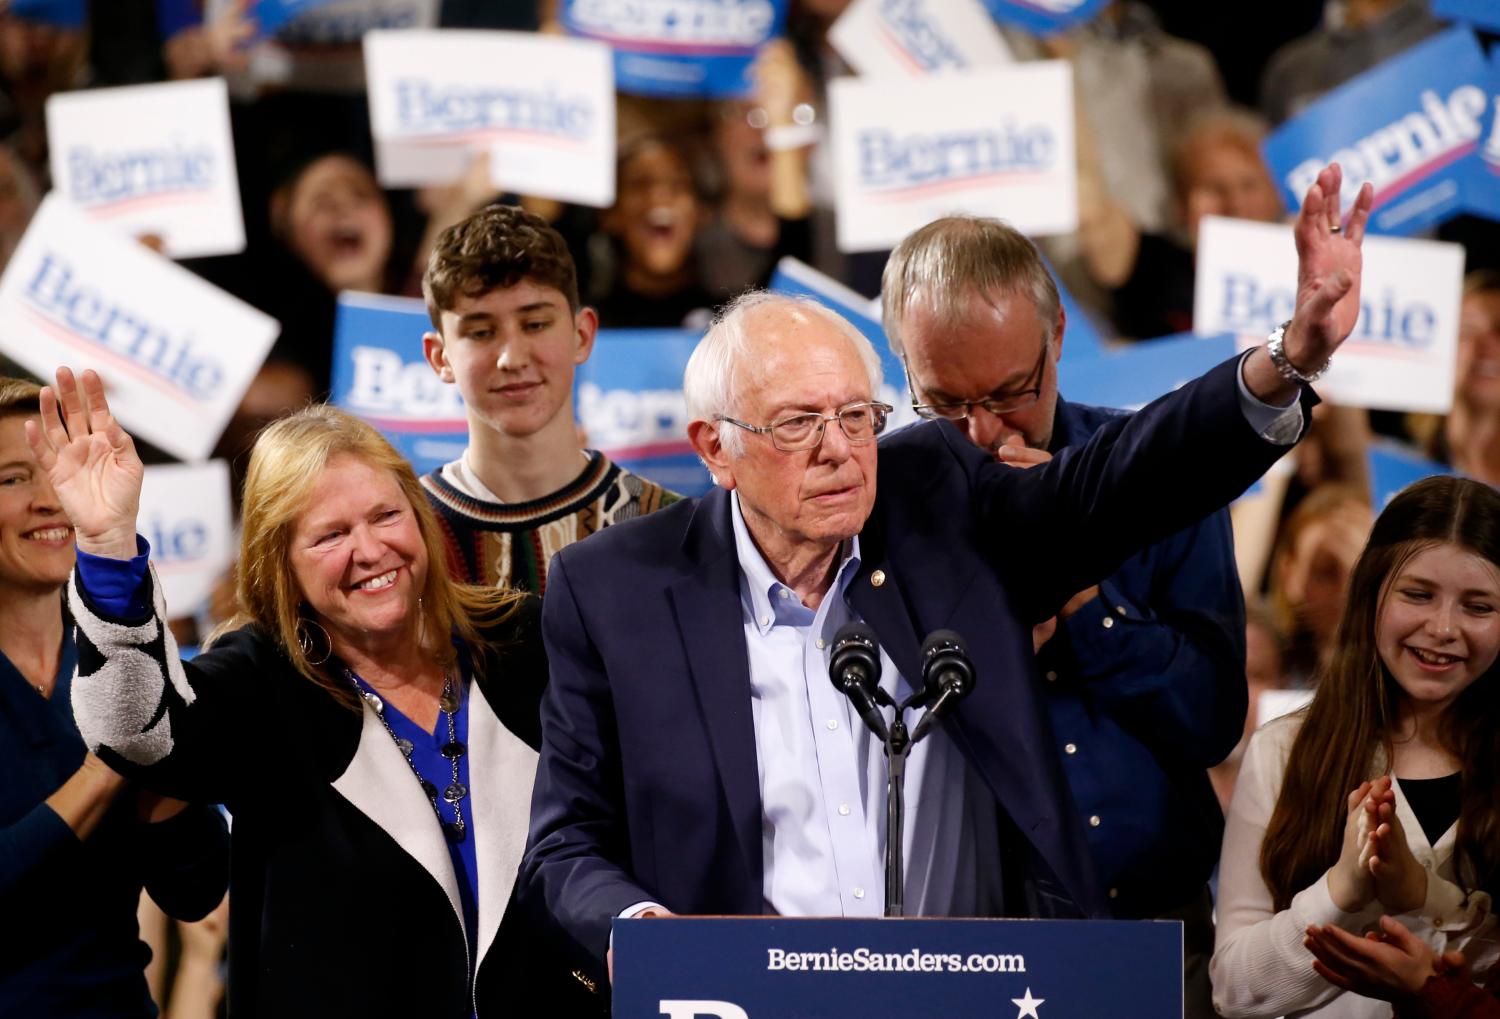 Democratic U.S. presidential candidate Senator Bernie Sanders is accompanied by his relatives, including his wife Jane, as he addresses supporters at his Super Tuesday night rally in Essex Junction, Vermont, U.S., March 3, 2020. REUTERS/Caitlin Ochs